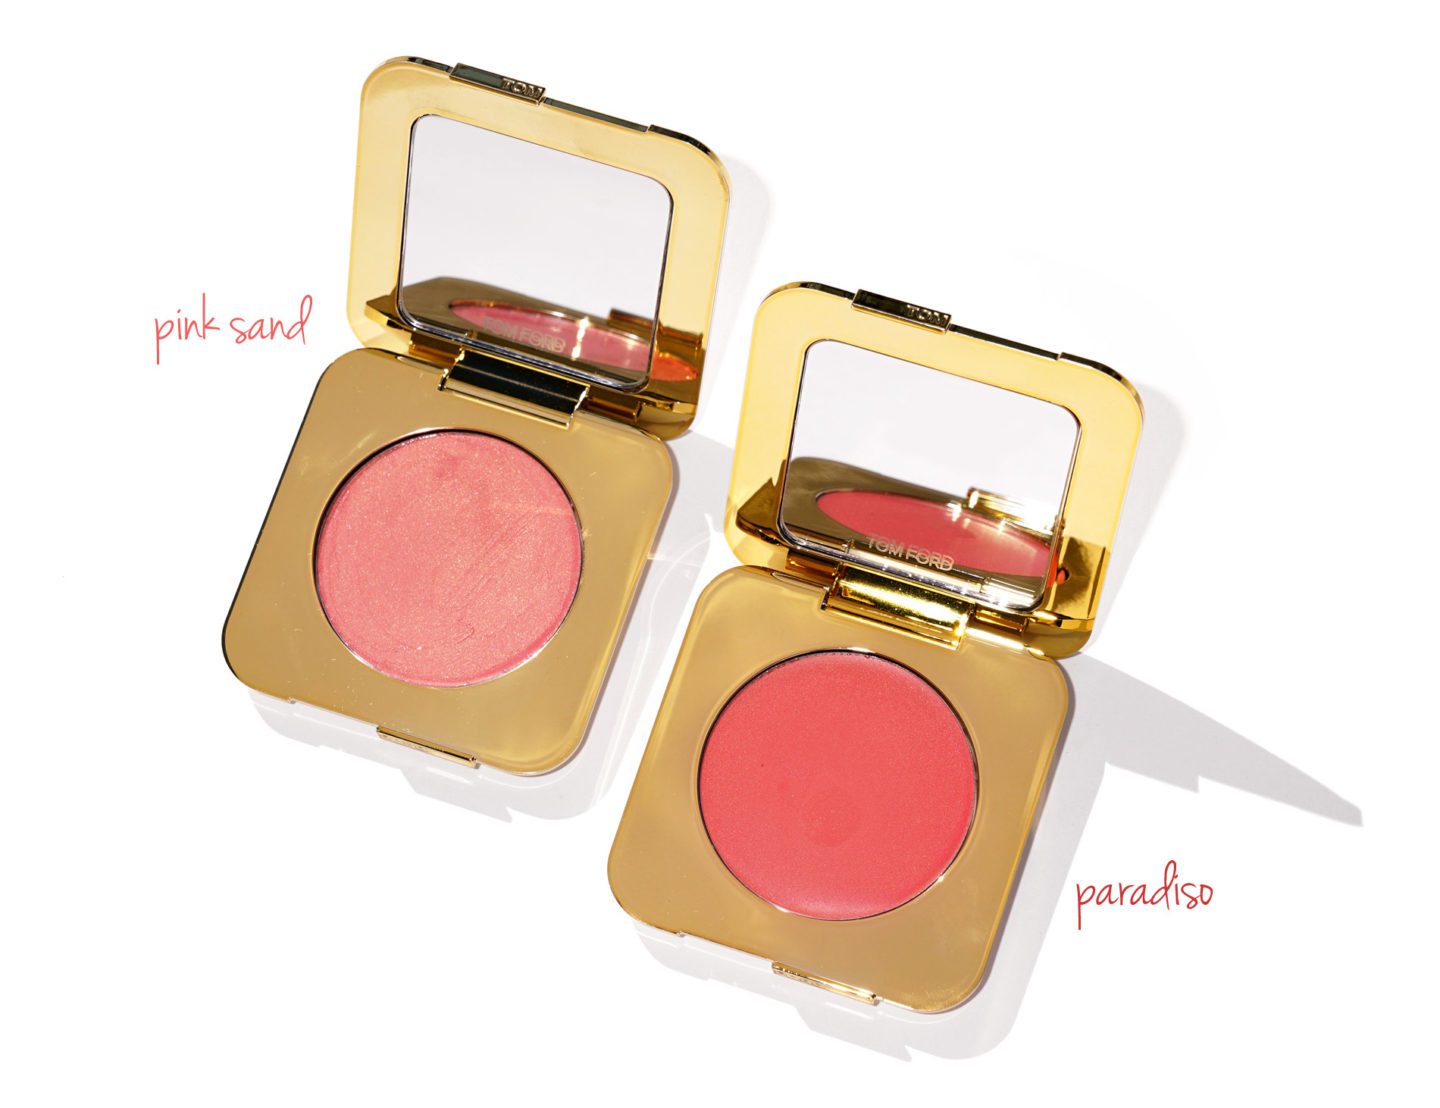 Tom Ford Pink Sand v Paradiso Cream Cheek Color | The Beauty Look Book